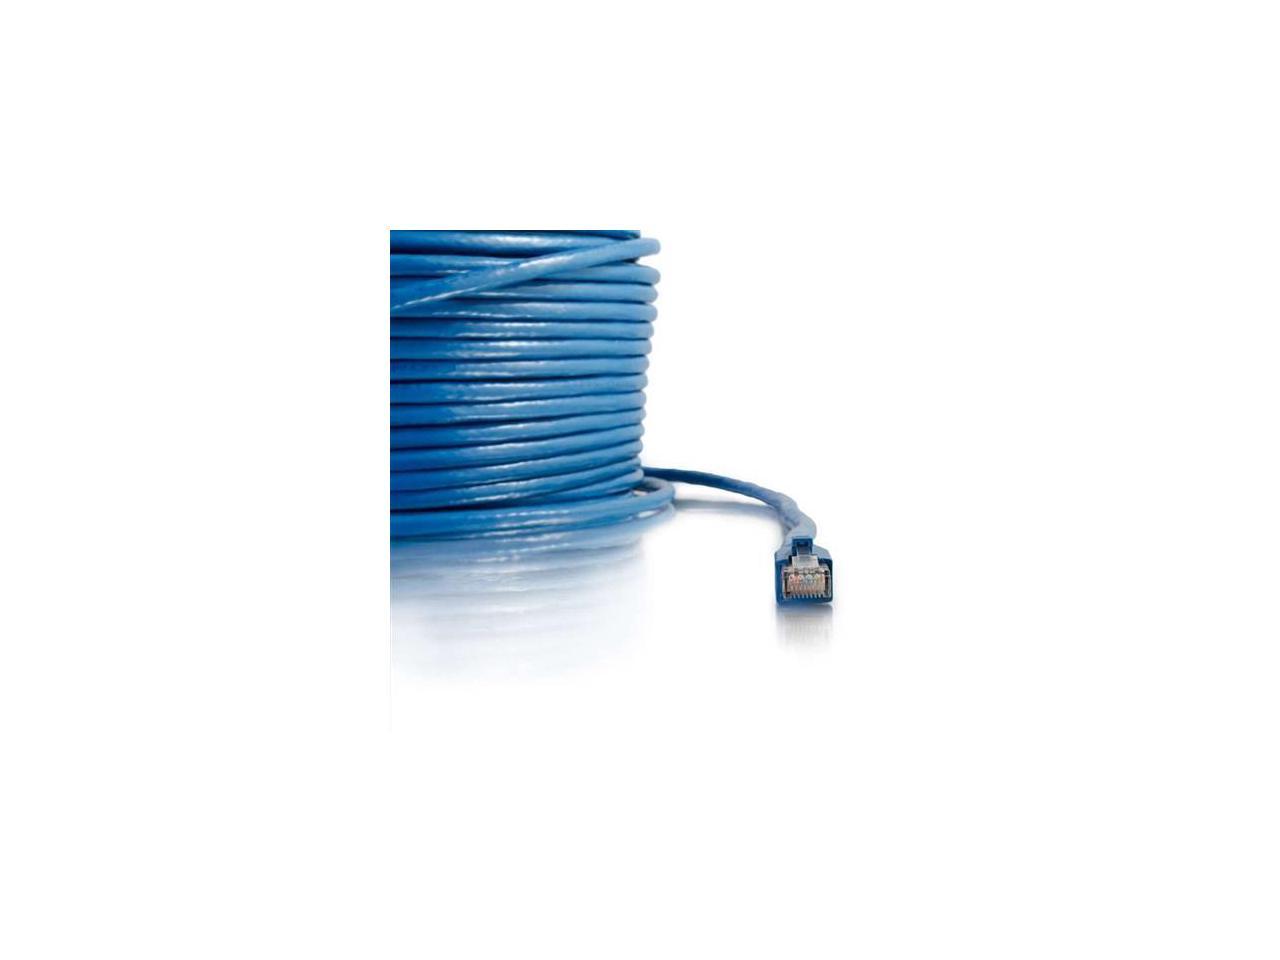 150FT CAT6 SNAGLESS SOLID SHIELDED ETHERNET NETWORK PATCH CABLE - BLUE